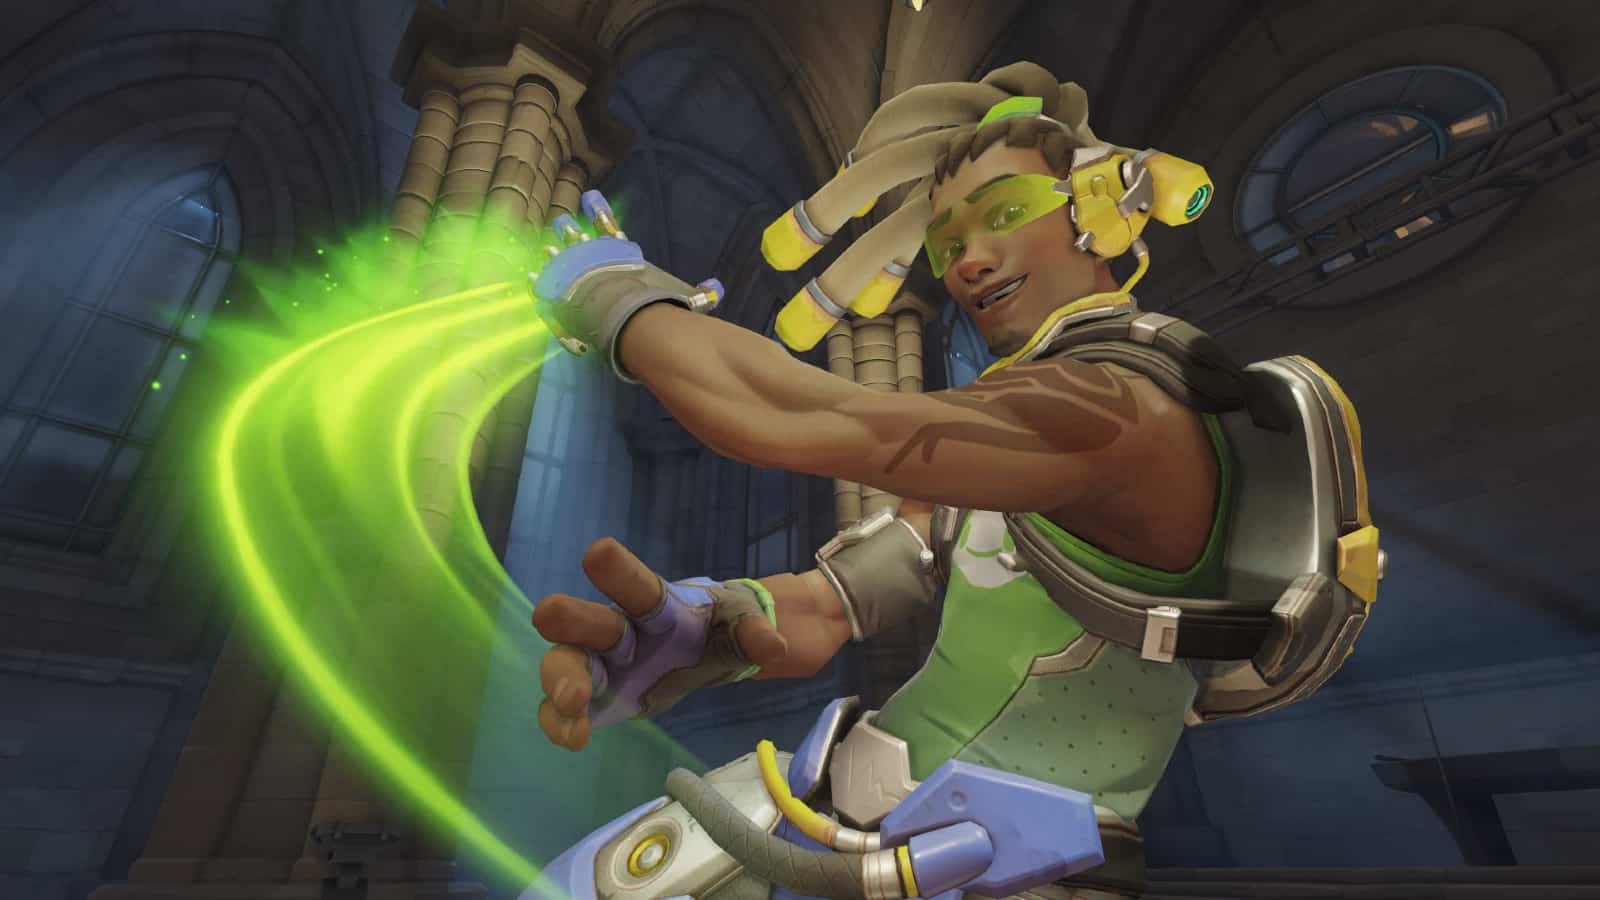 Lucio uses sound barrier trick